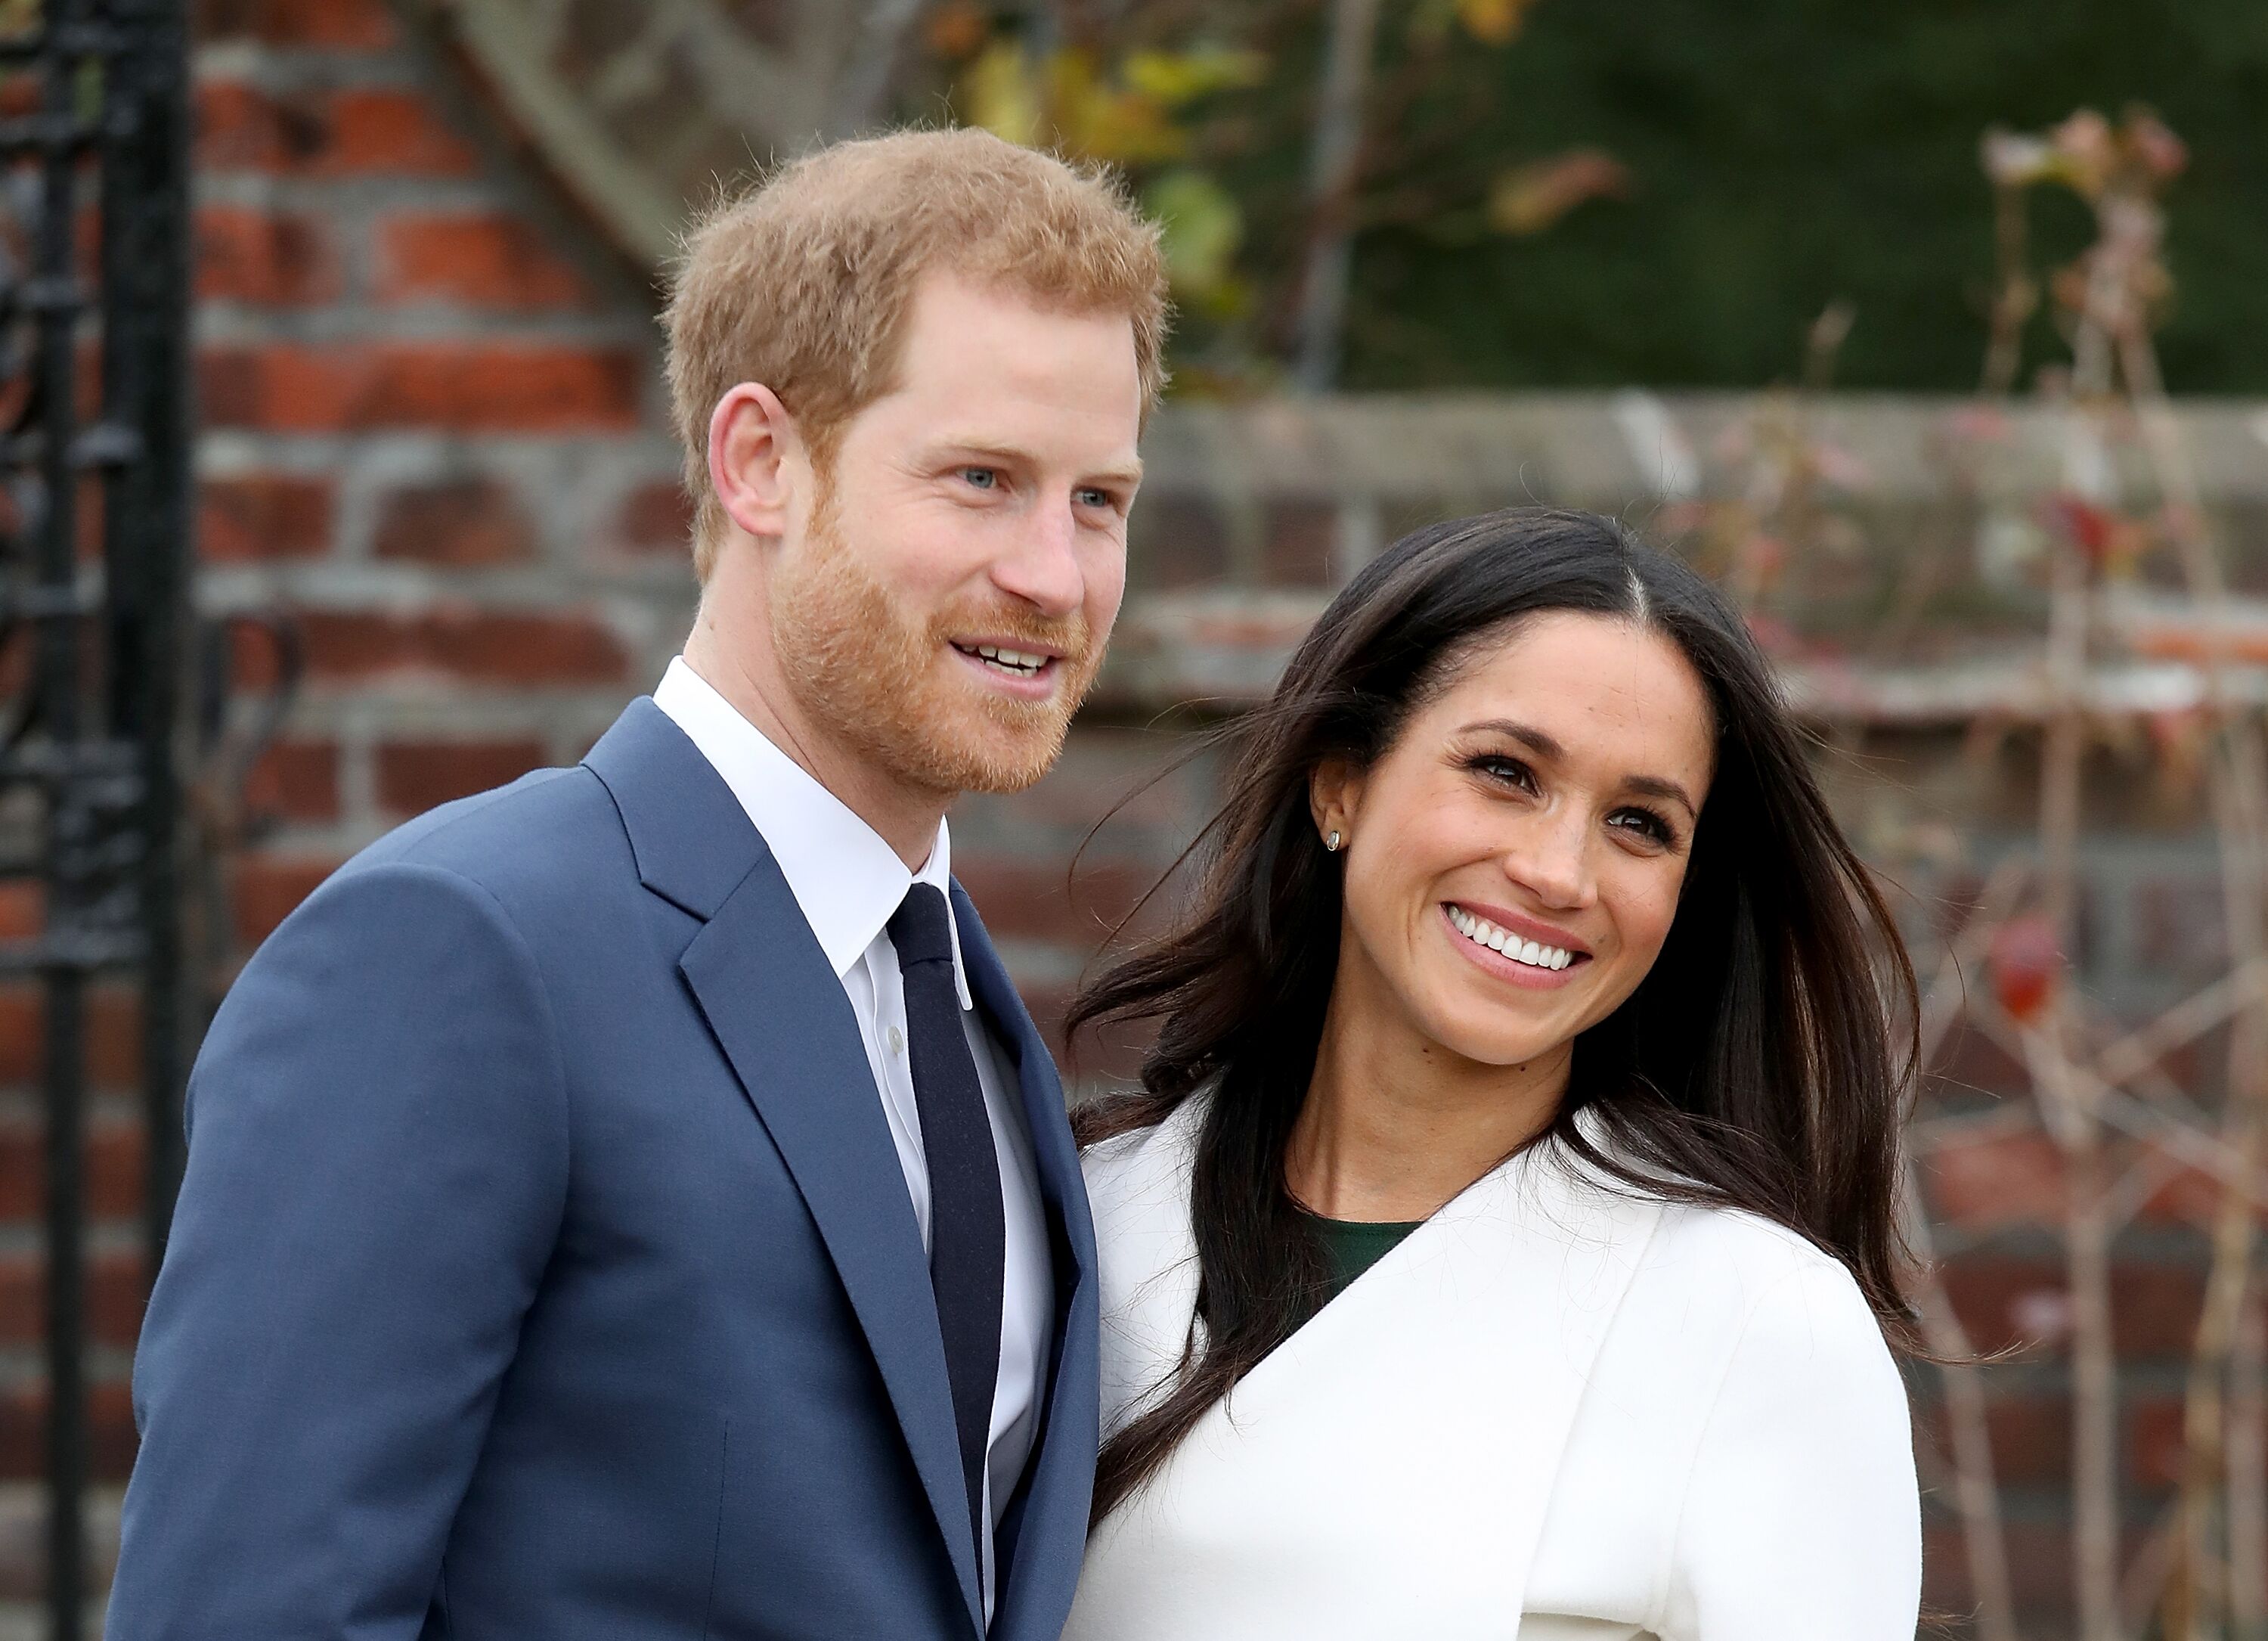 Prince Harry and actress Meghan Markle during an official photocall to announce their engagement at The Sunken Gardens at Kensington Palace on November 27, 2017. | Photo: Getty Images 